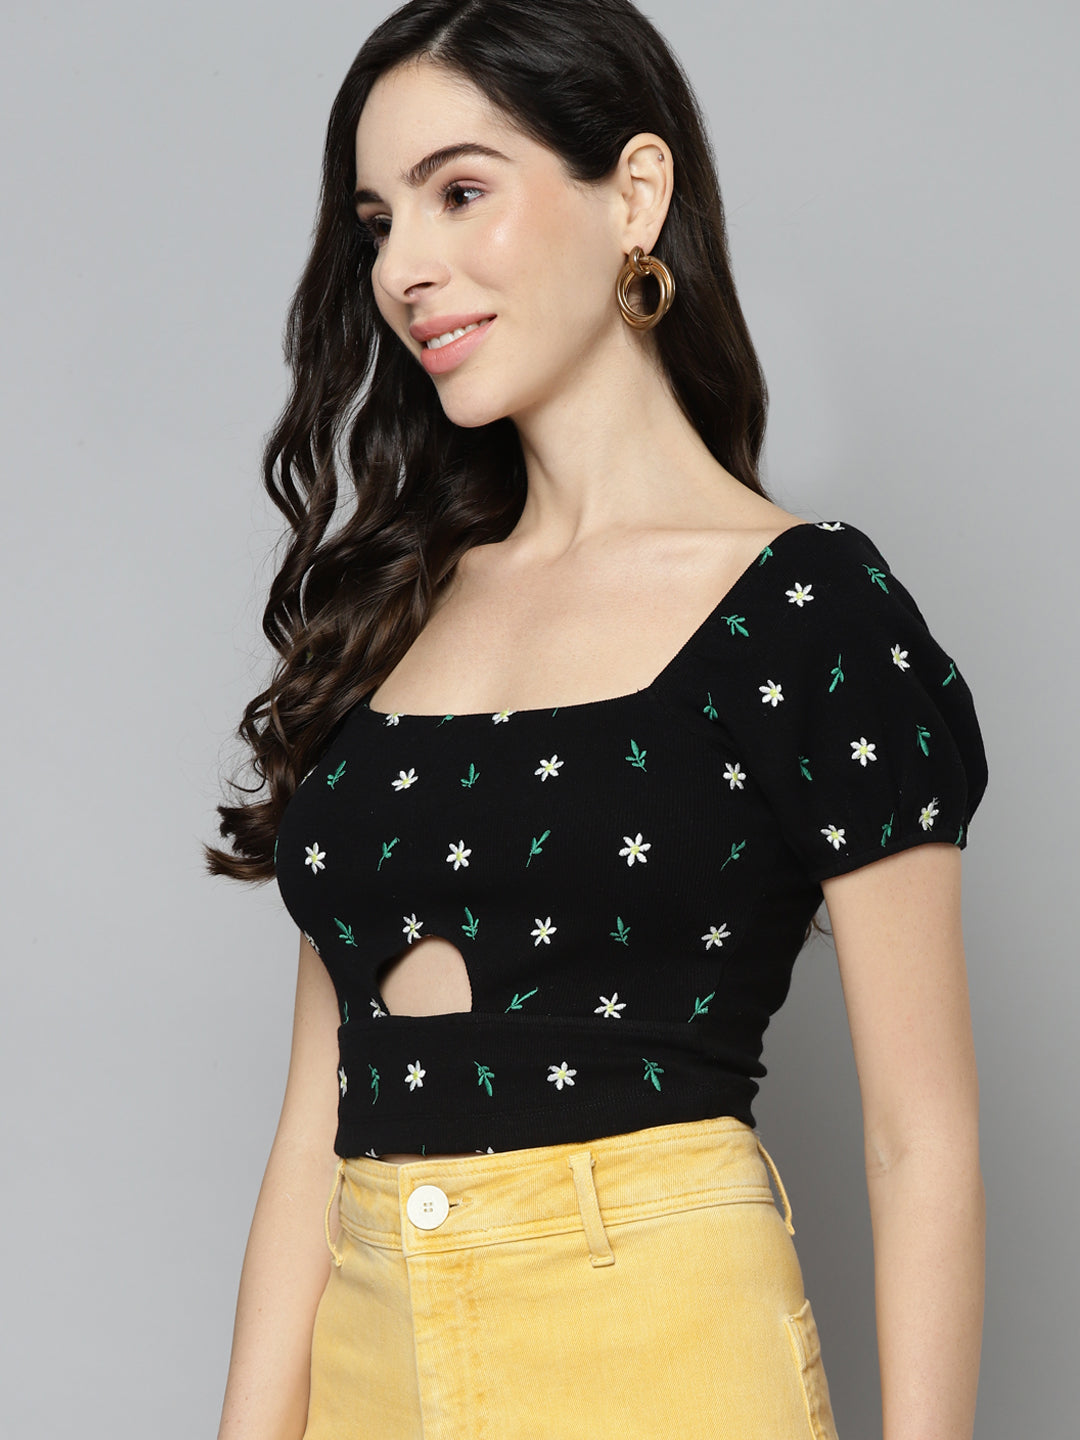 Black & White Floral Embroidered Crop Top